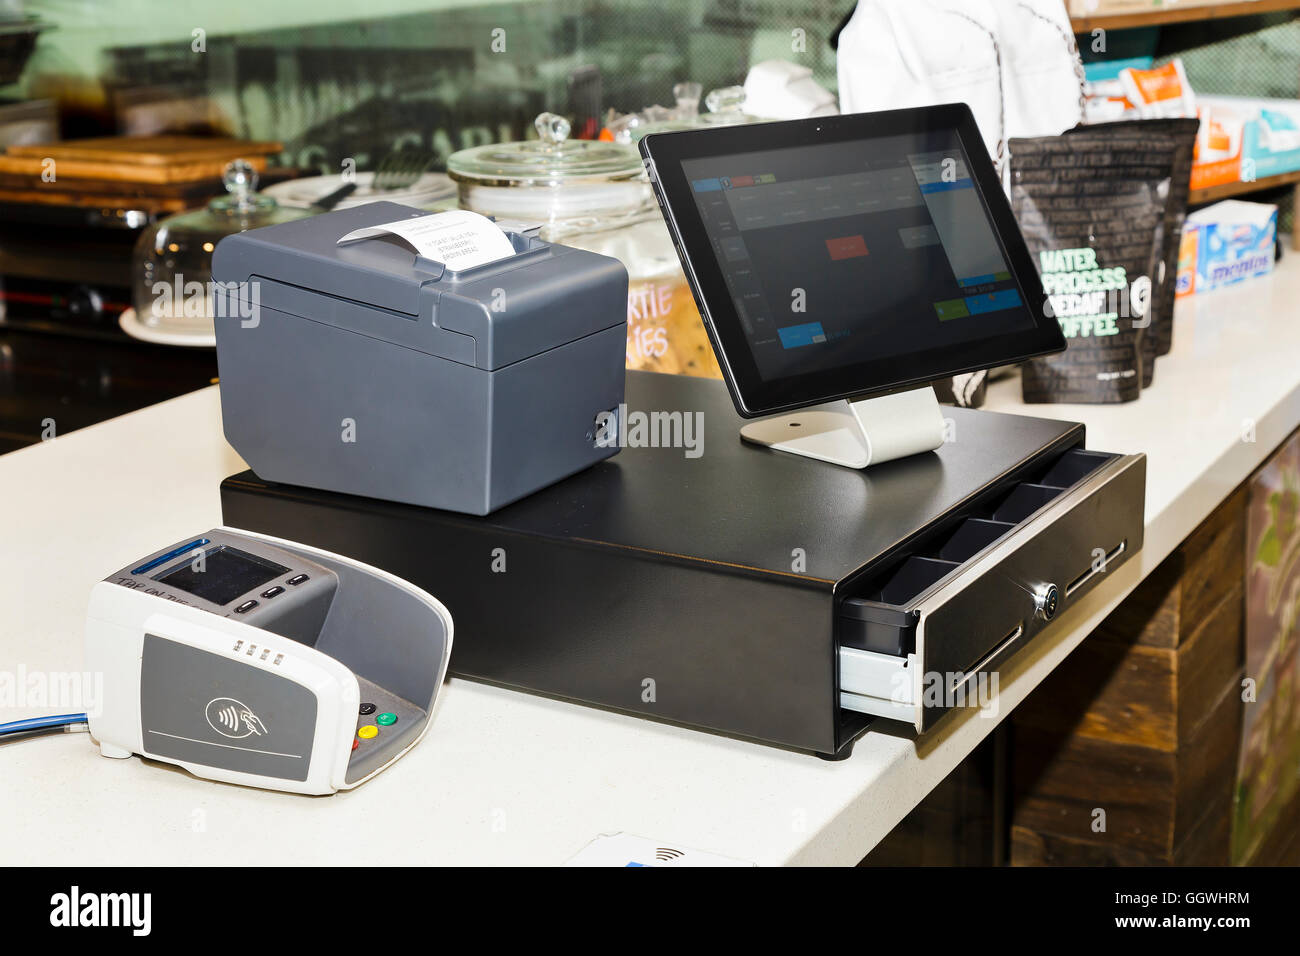 POS terminal consisting of Tablet computer with touchscreen, mobile printer and pay terminal on a cashbox at a counter Stock Photo